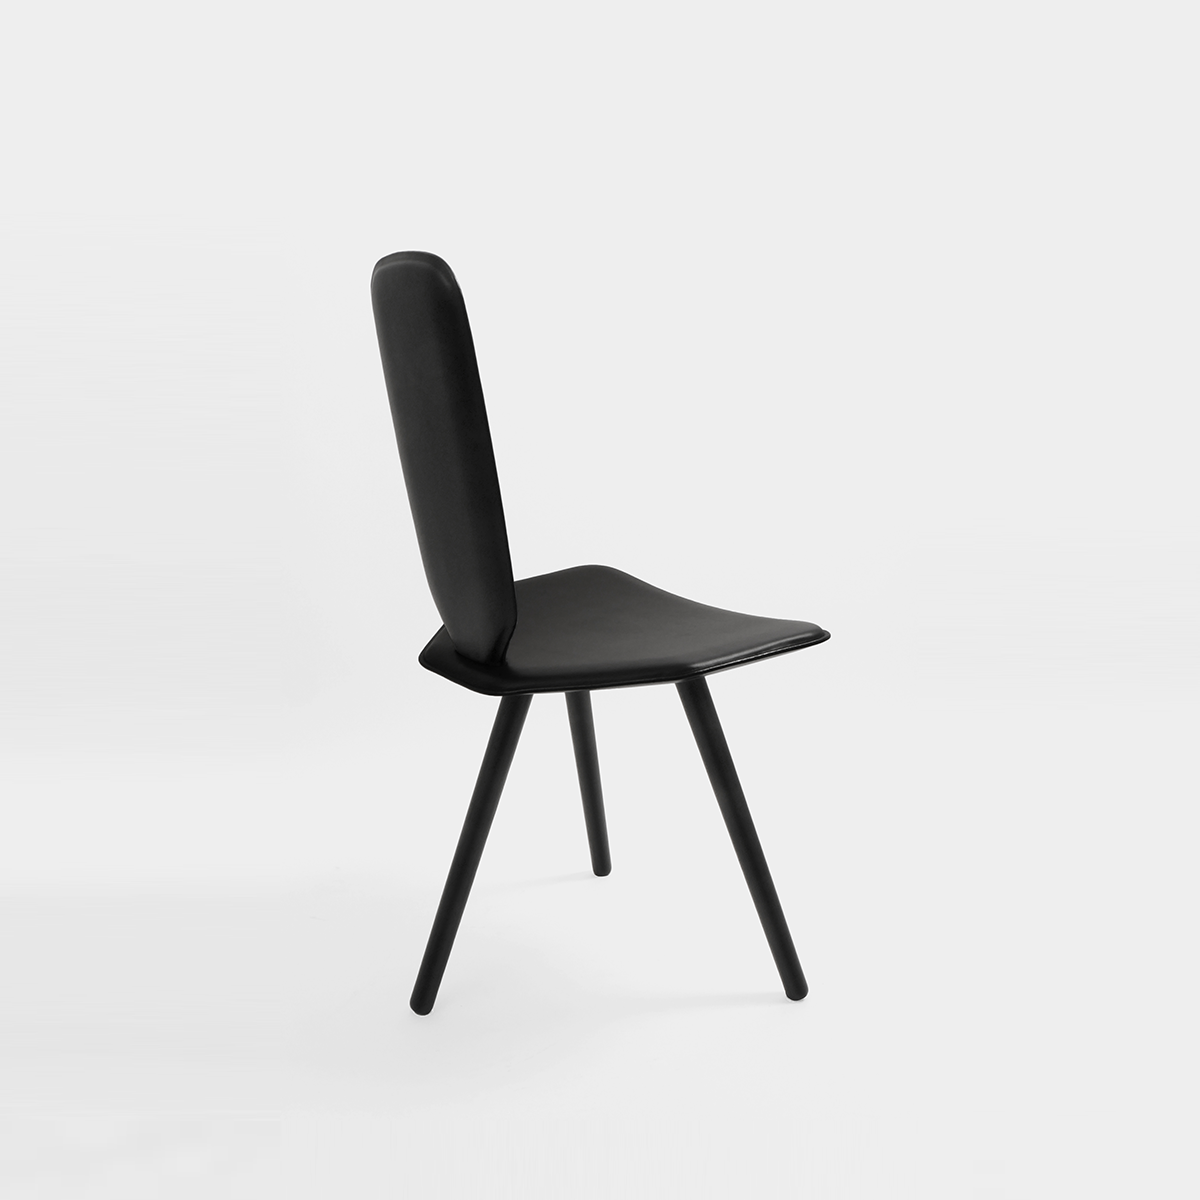 Bavaresk High dining chair by Christophe de la Fontaine for DANTE - Goods and Bads